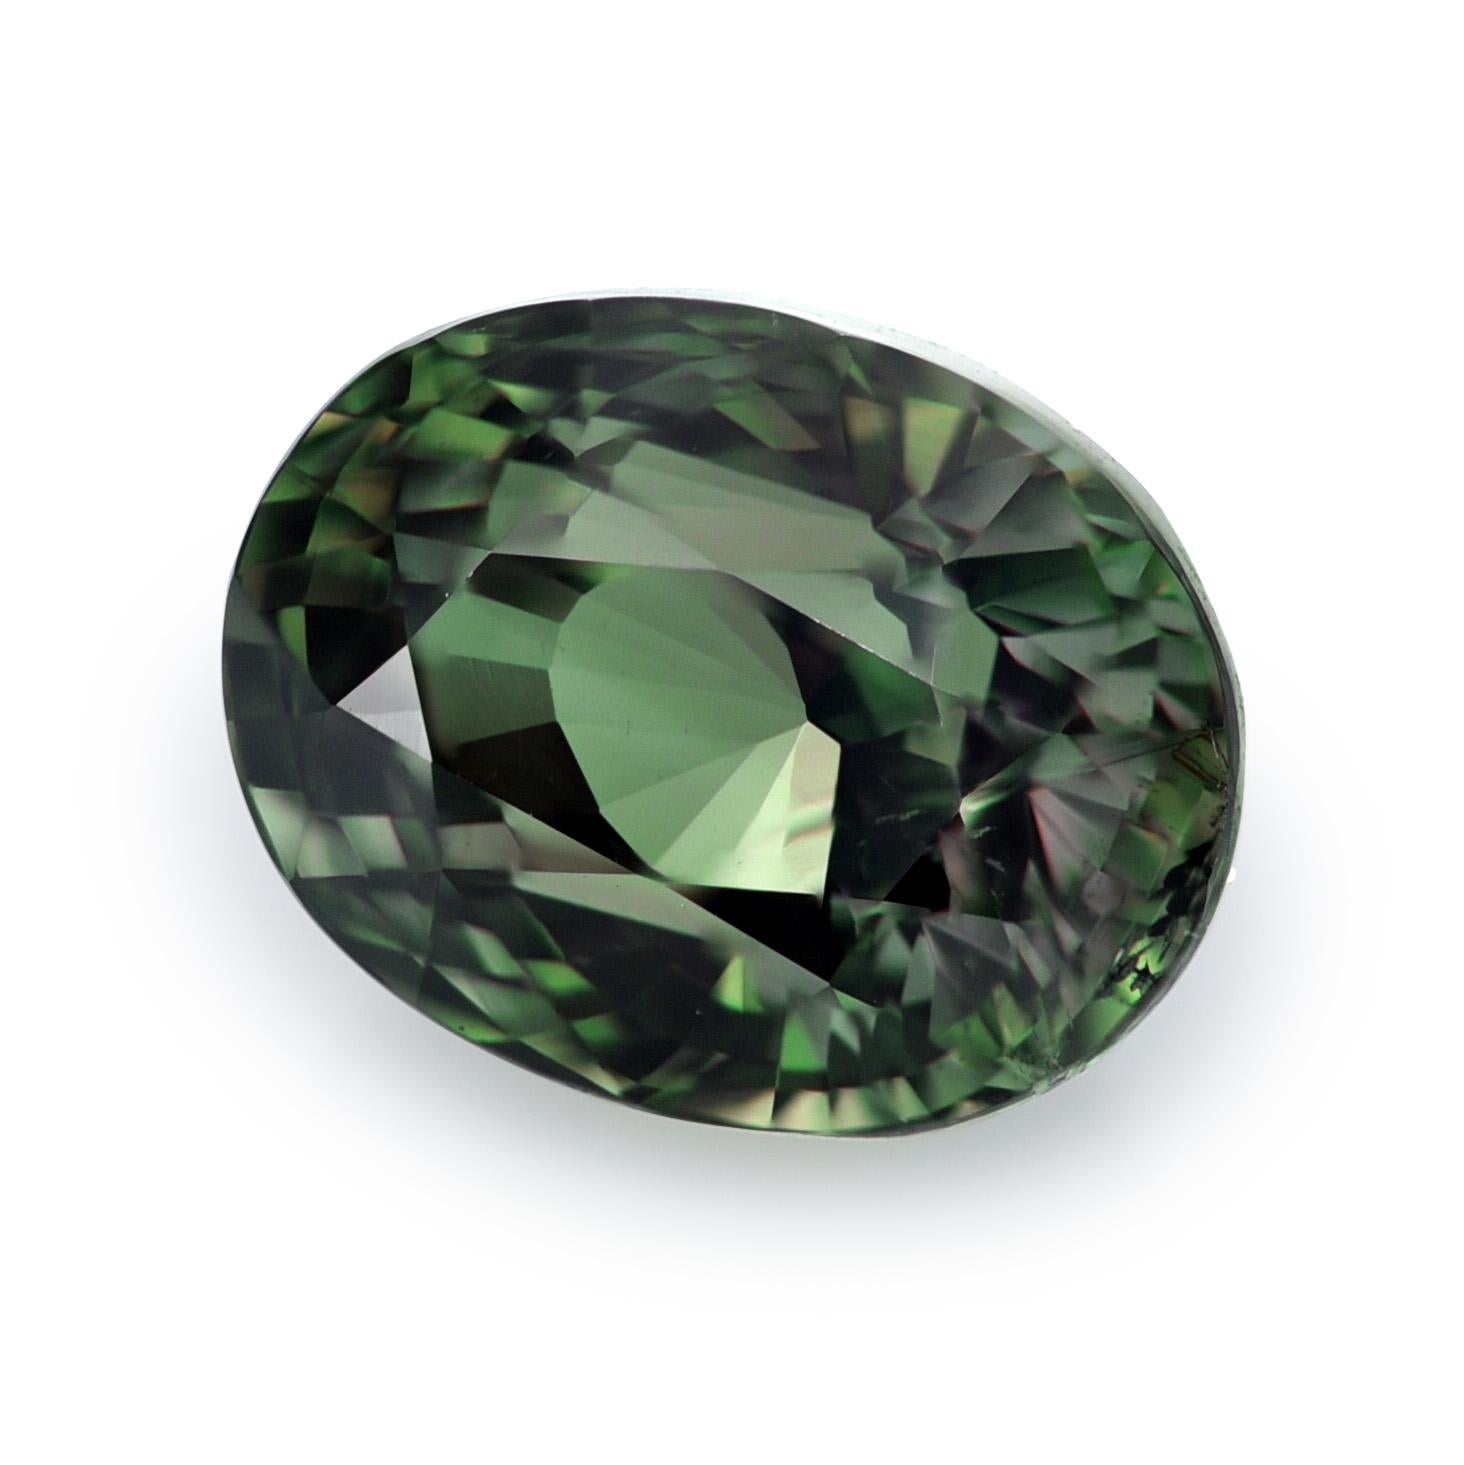 Mixed Cut GIA Certified 1.11 Carats Color Change Alexandrite For Sale